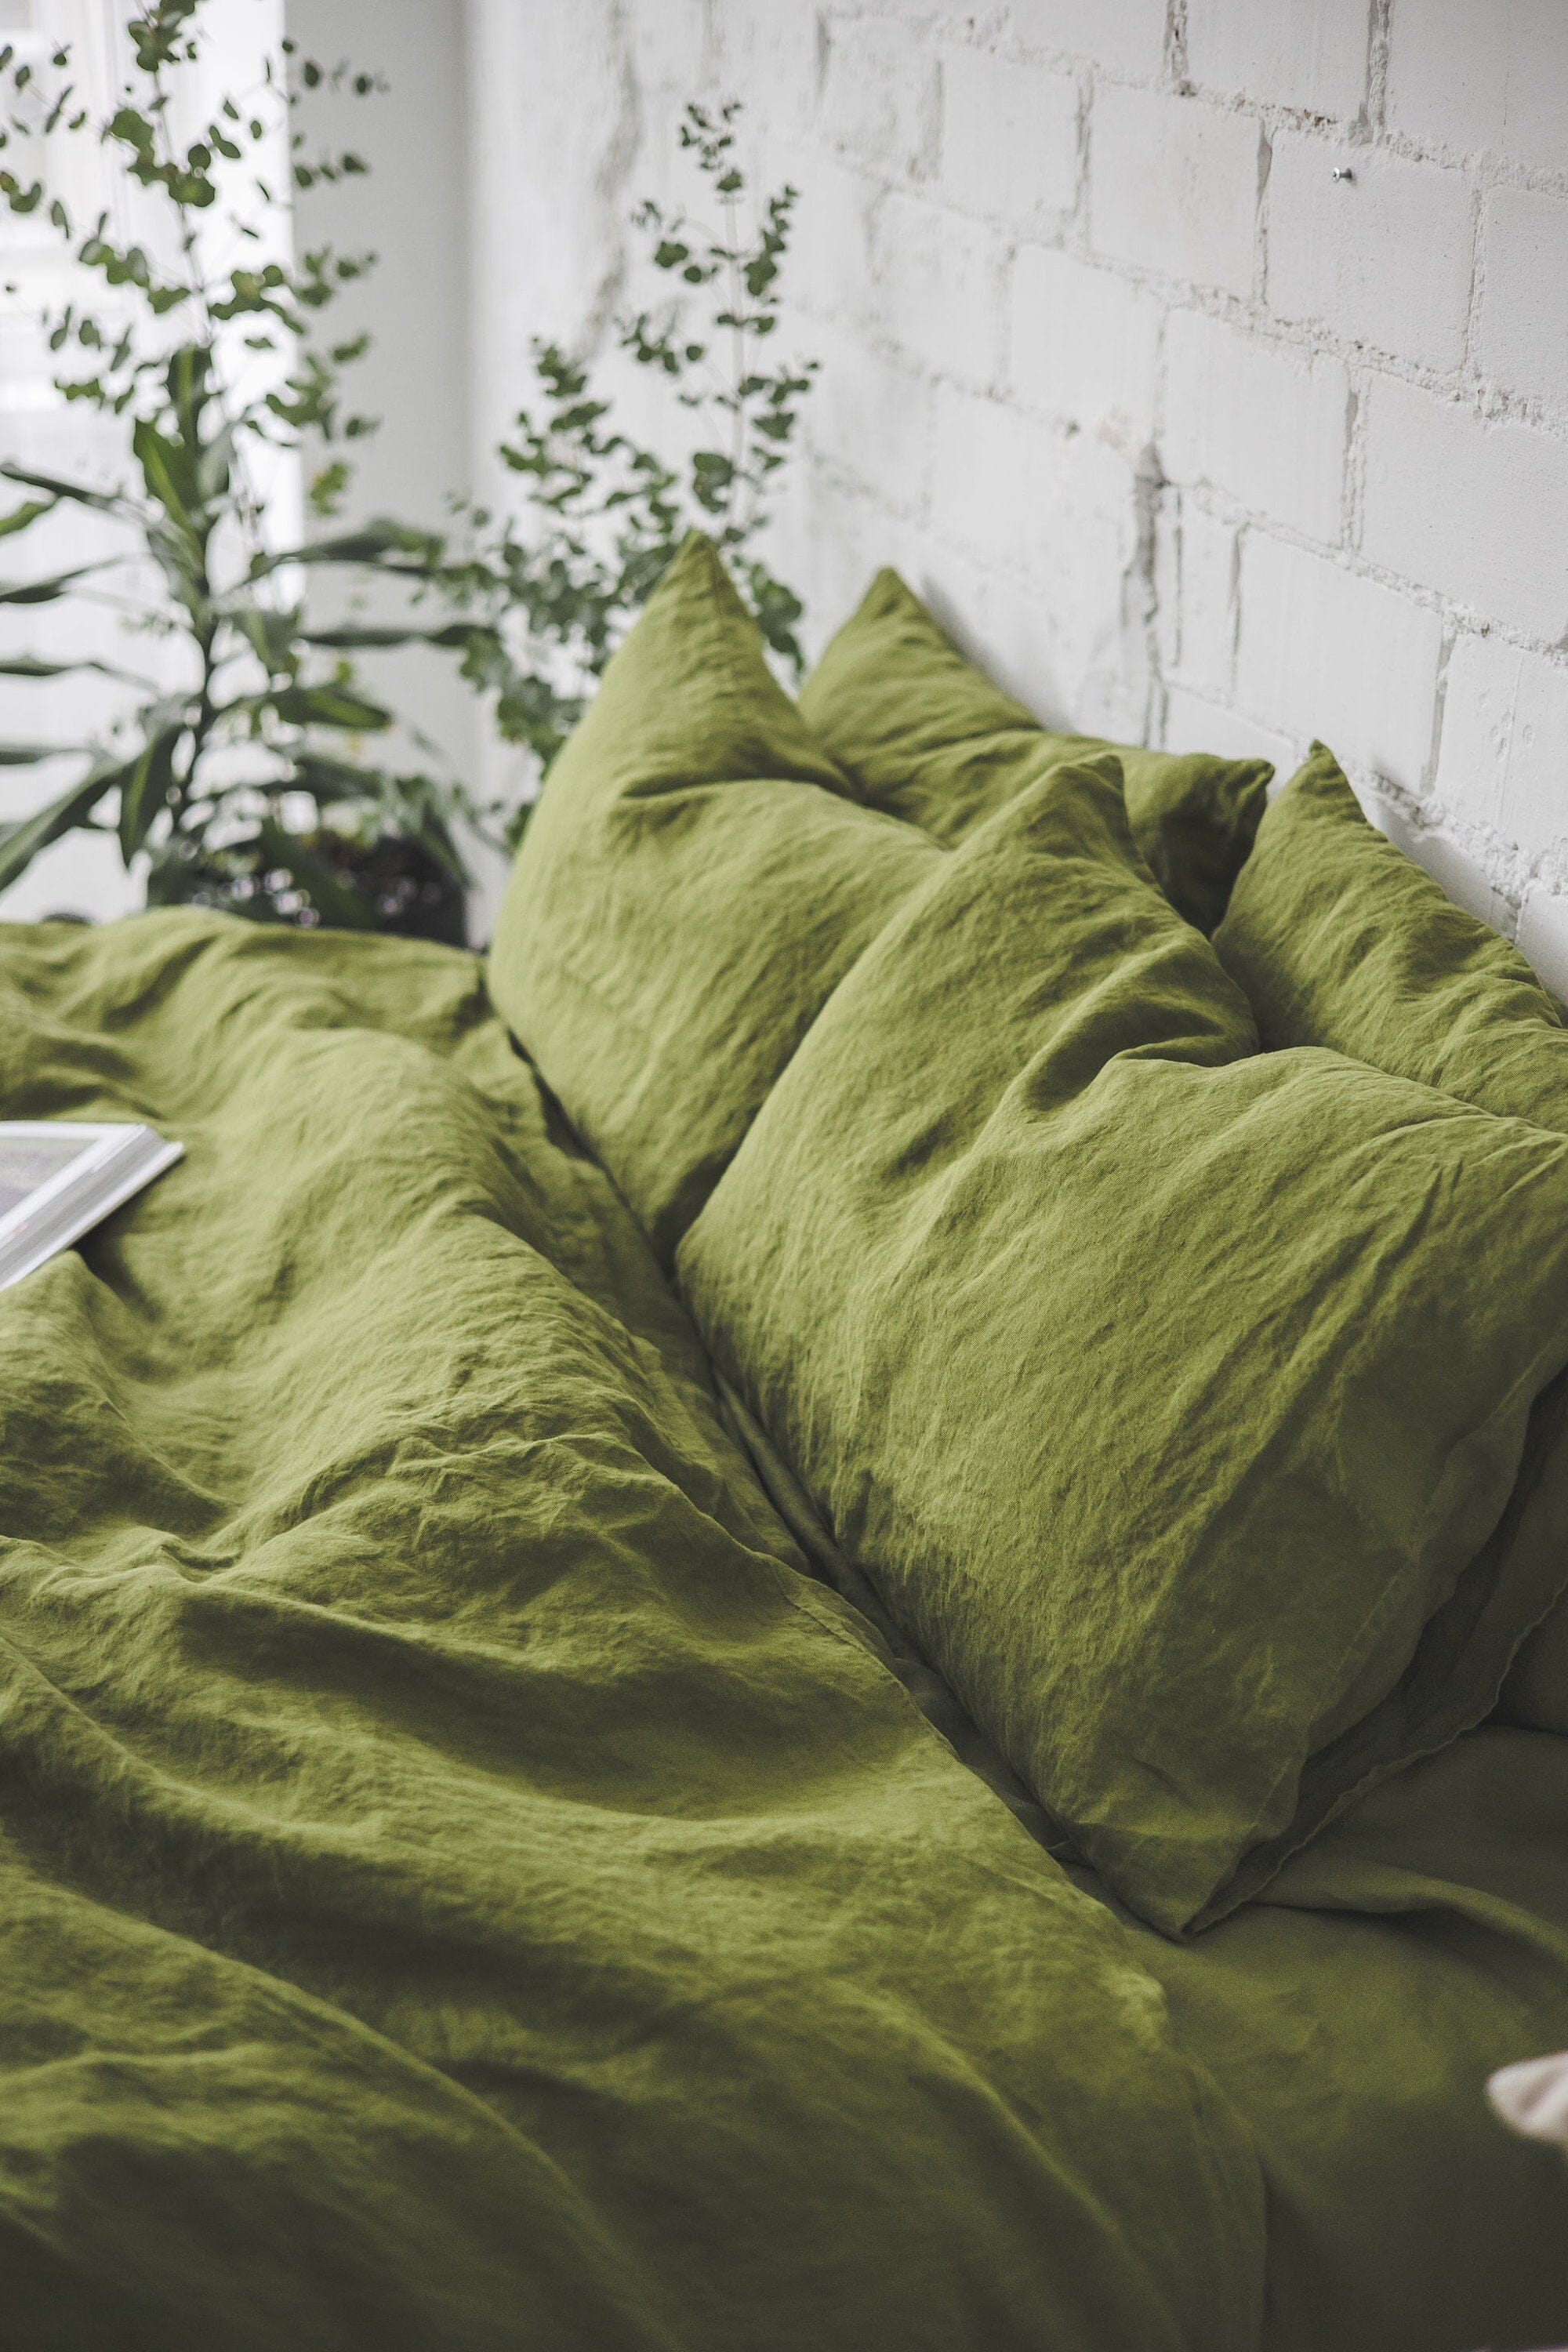 Top 10 moss bed sheets ideas and inspiration